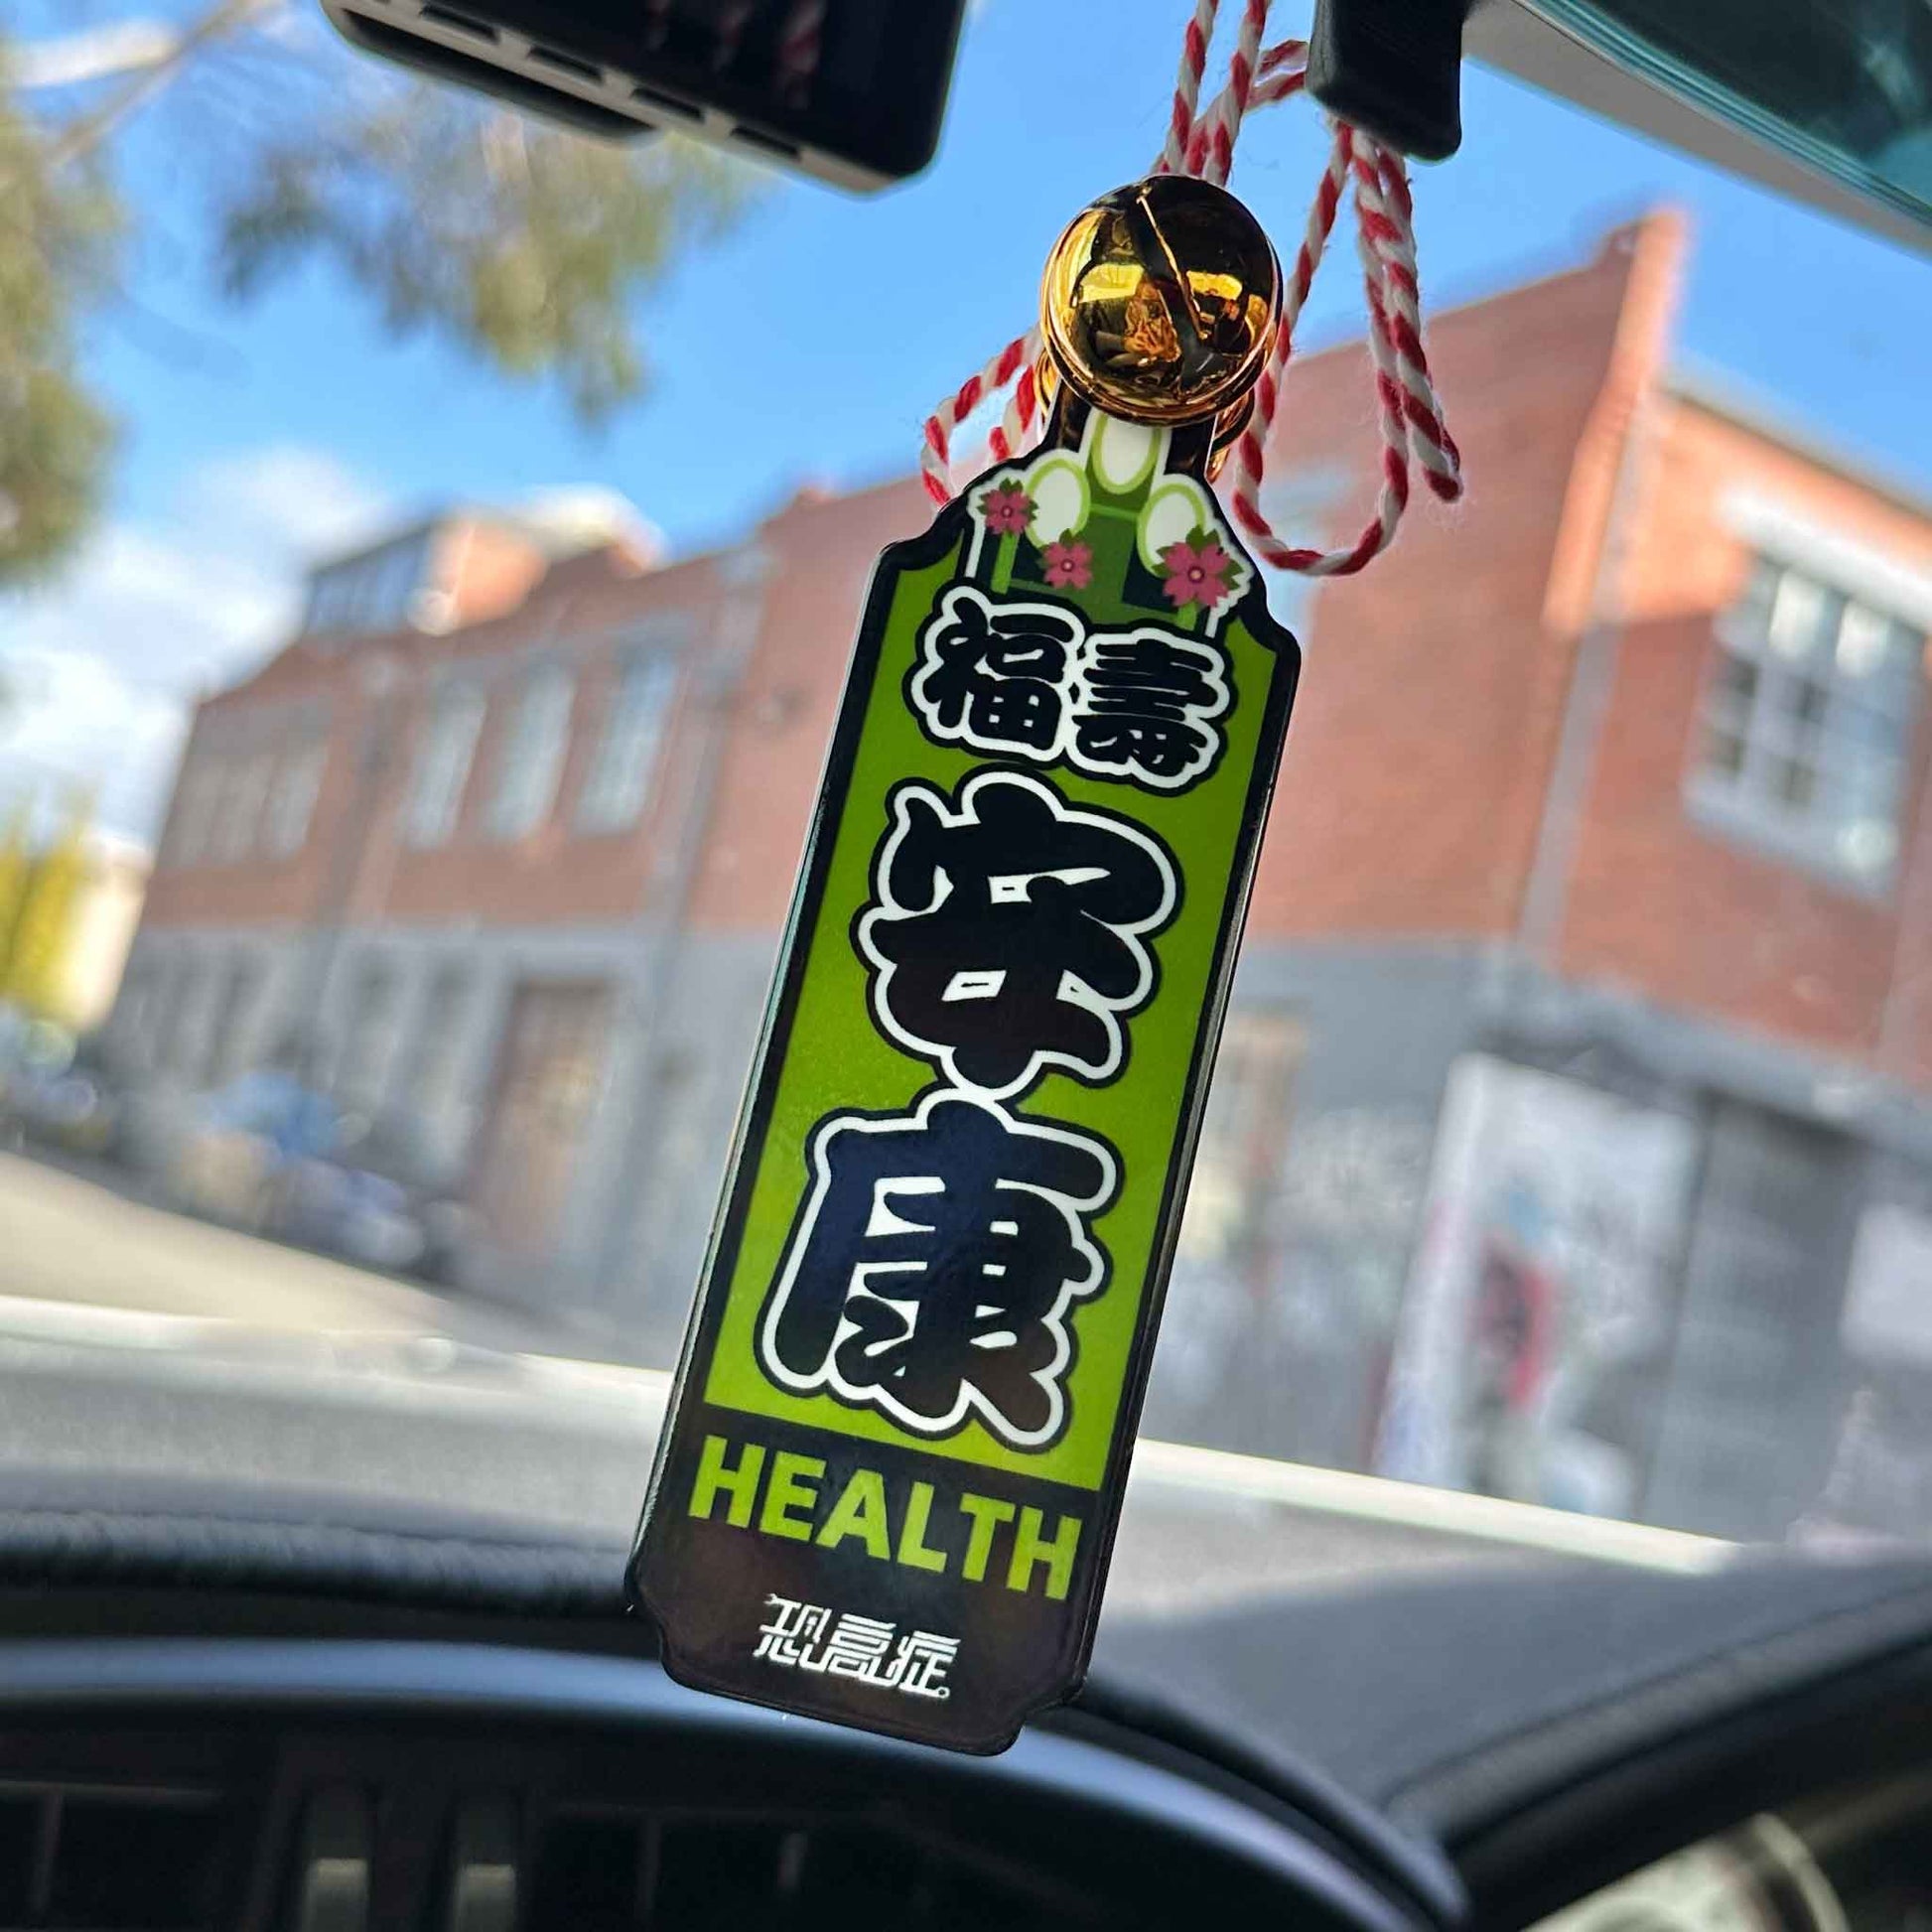 A green Japanese charm meaning 'healthy life' hung on a car's rearview mirror